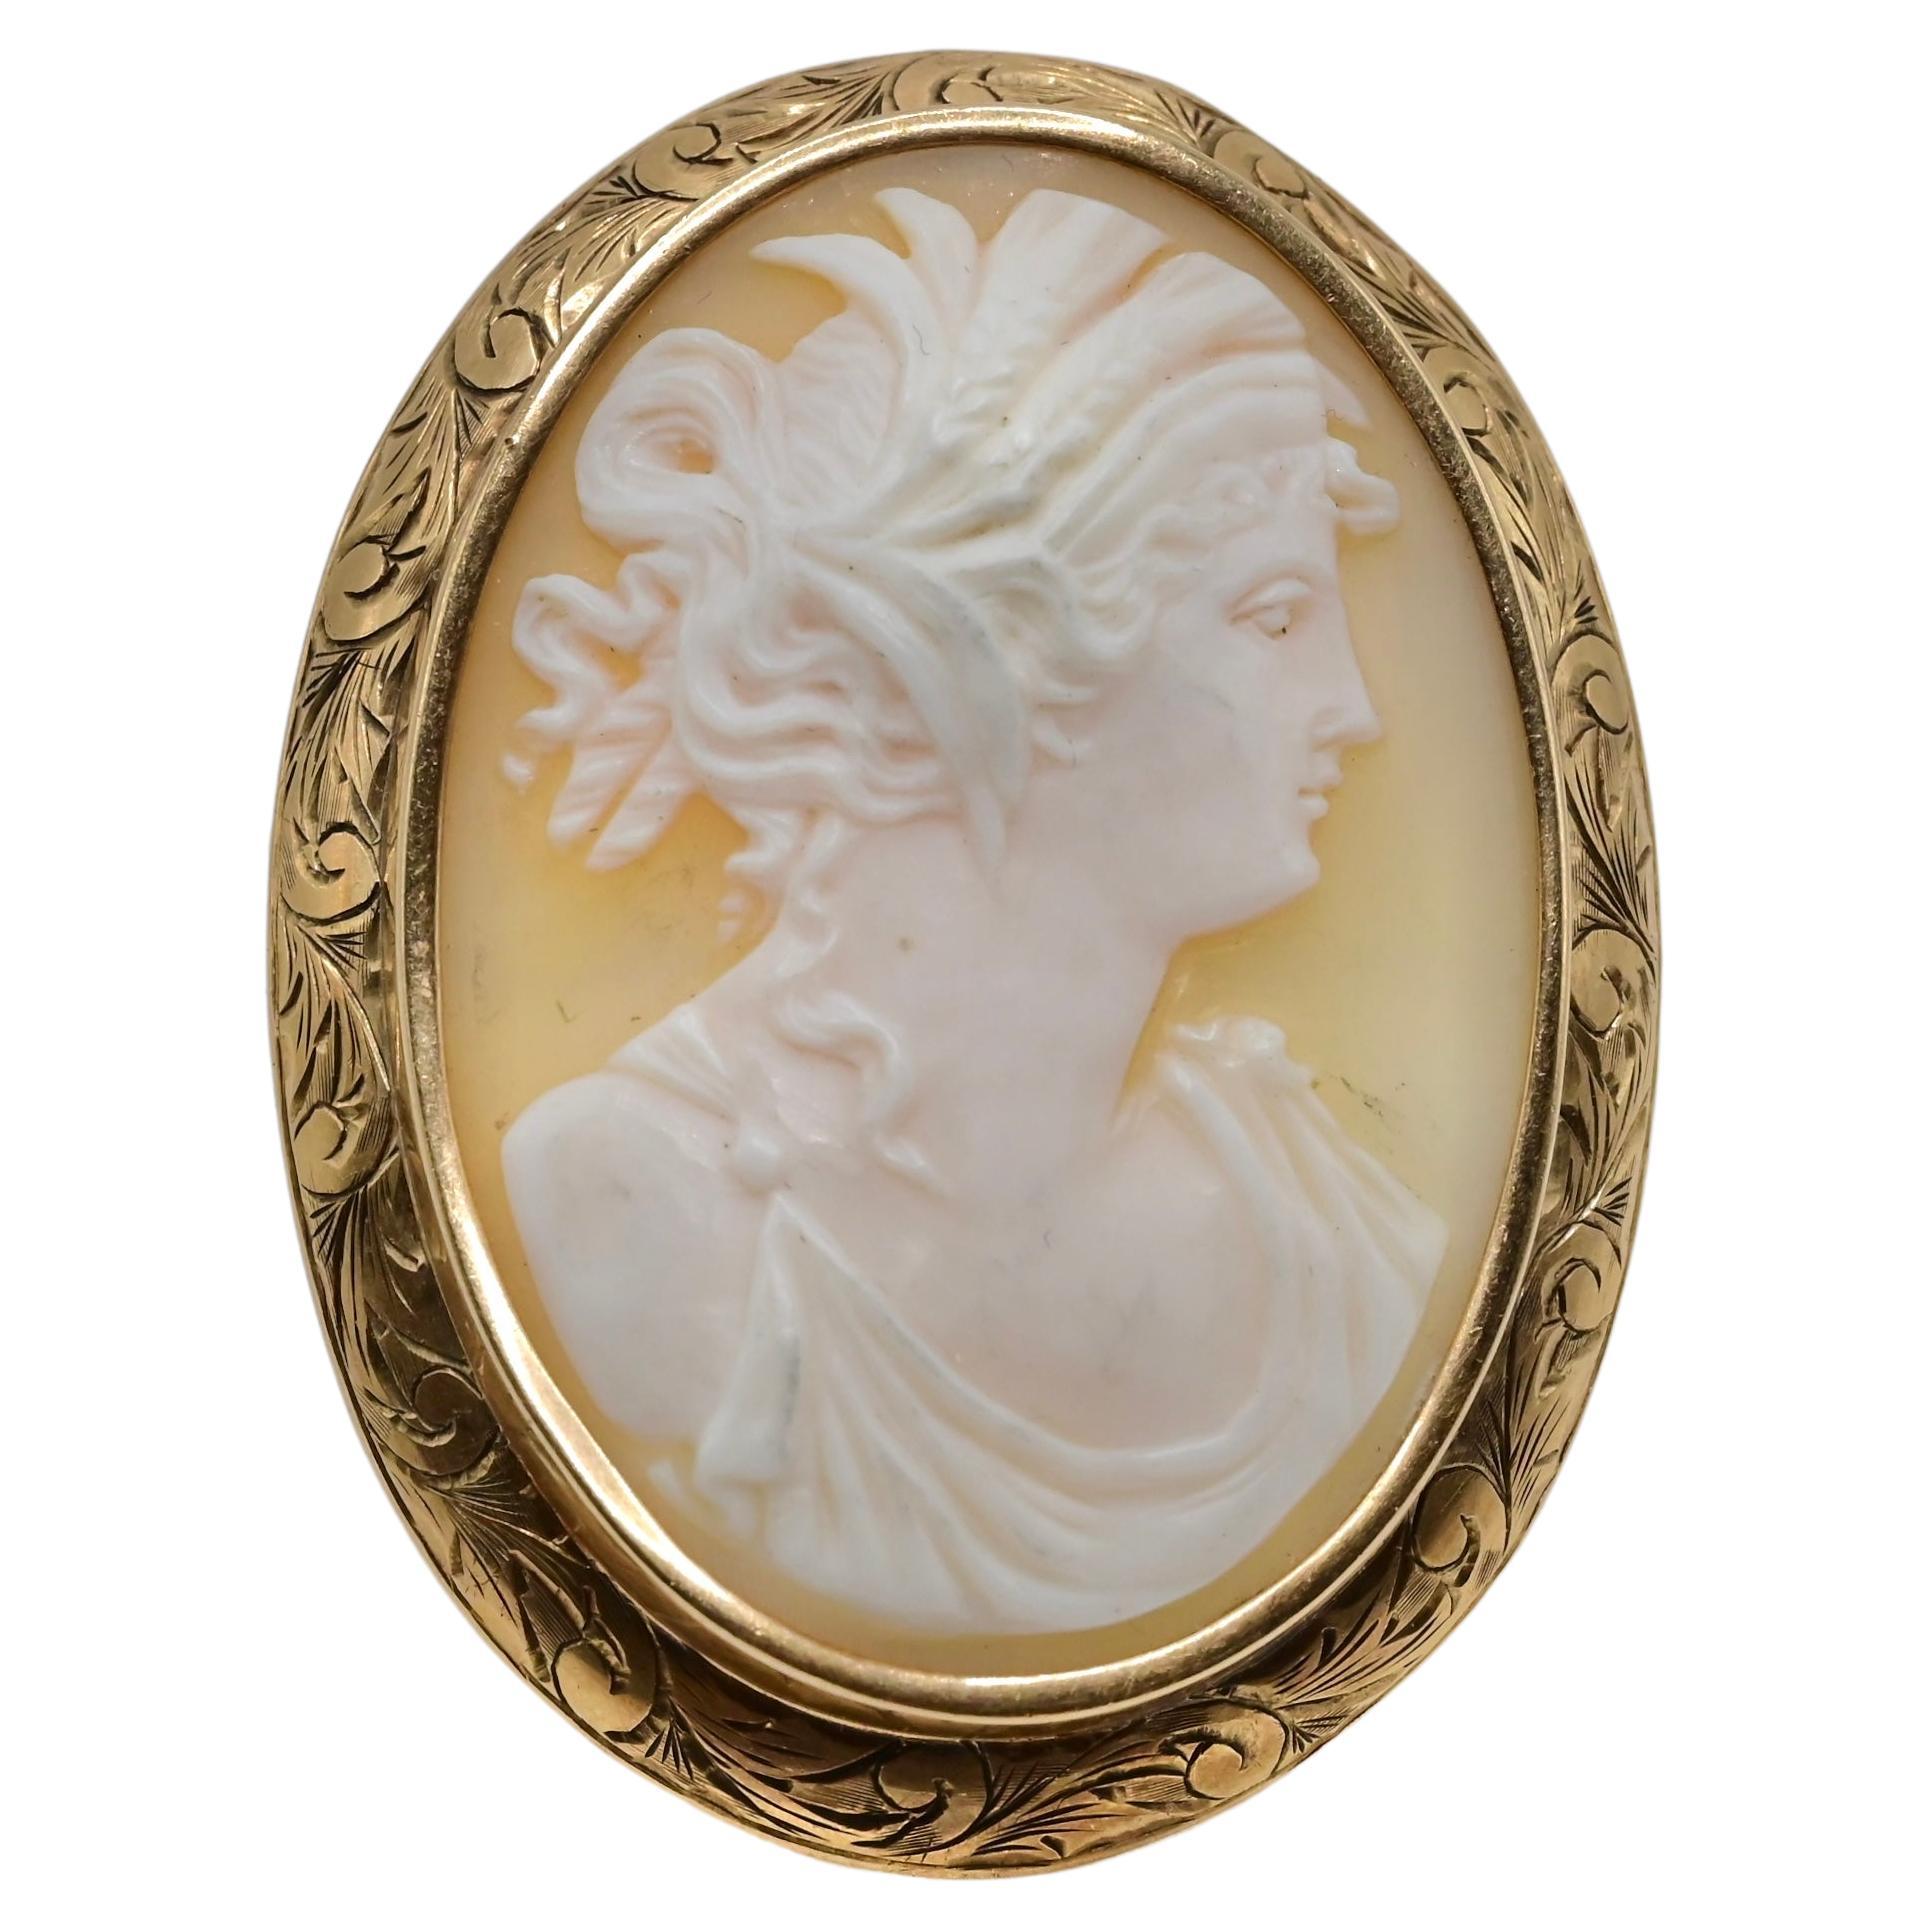 Eye Catching Carved Shell Gold Cameo Brooch